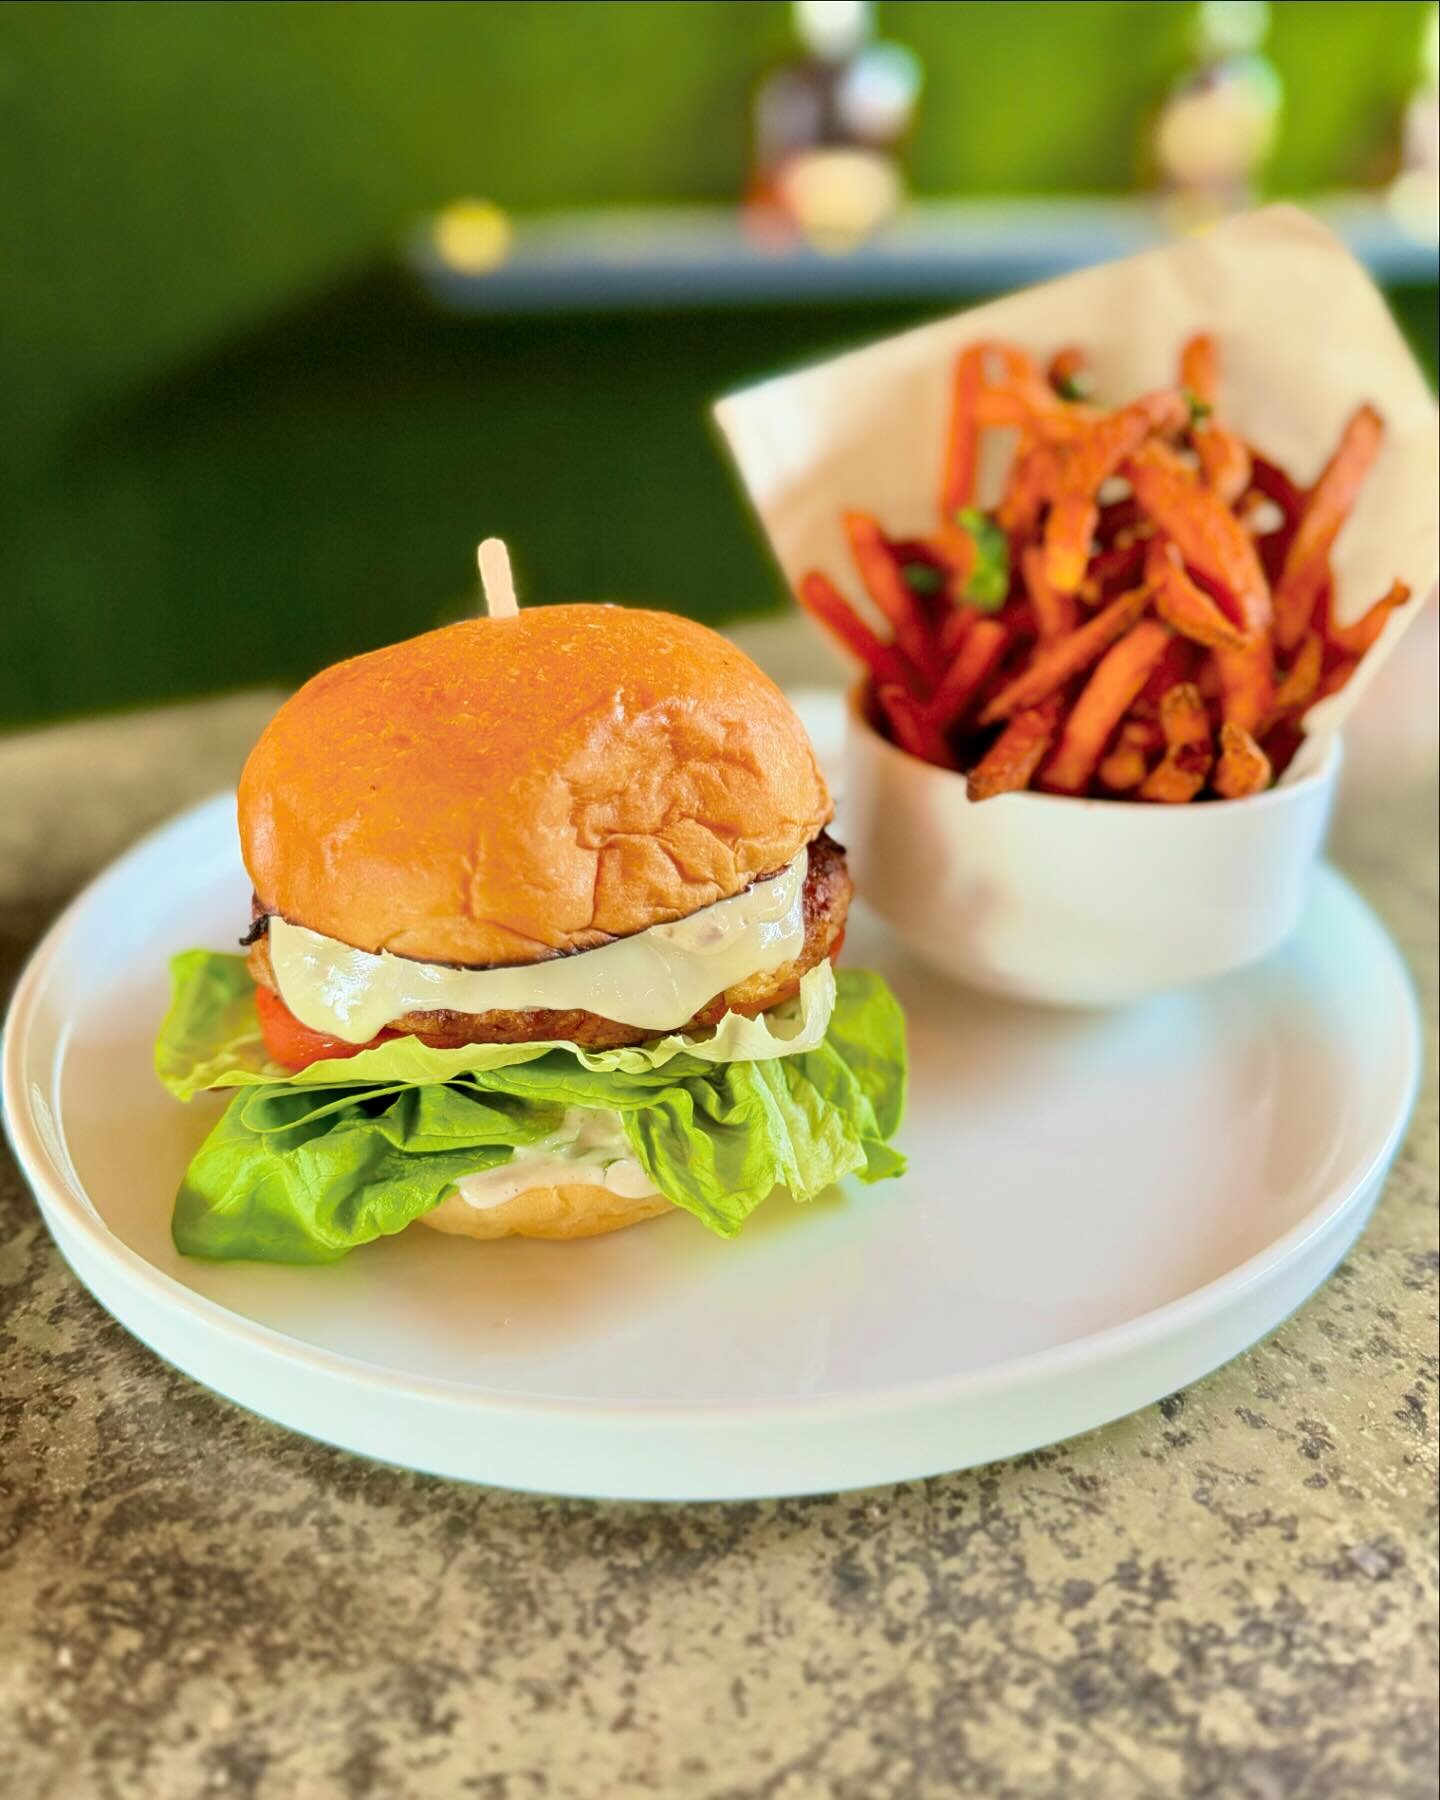 We are featuring a Crab Cake Sandwich served with Old Bay Sweet Fries! 

#nationalcrabmeatday #crabcakesandwich #dallasdining #lakehighlands #lheats #sweetpotatofries #eastdallas #whiterocklake #dallasfoodie #dallasfoodbloggers